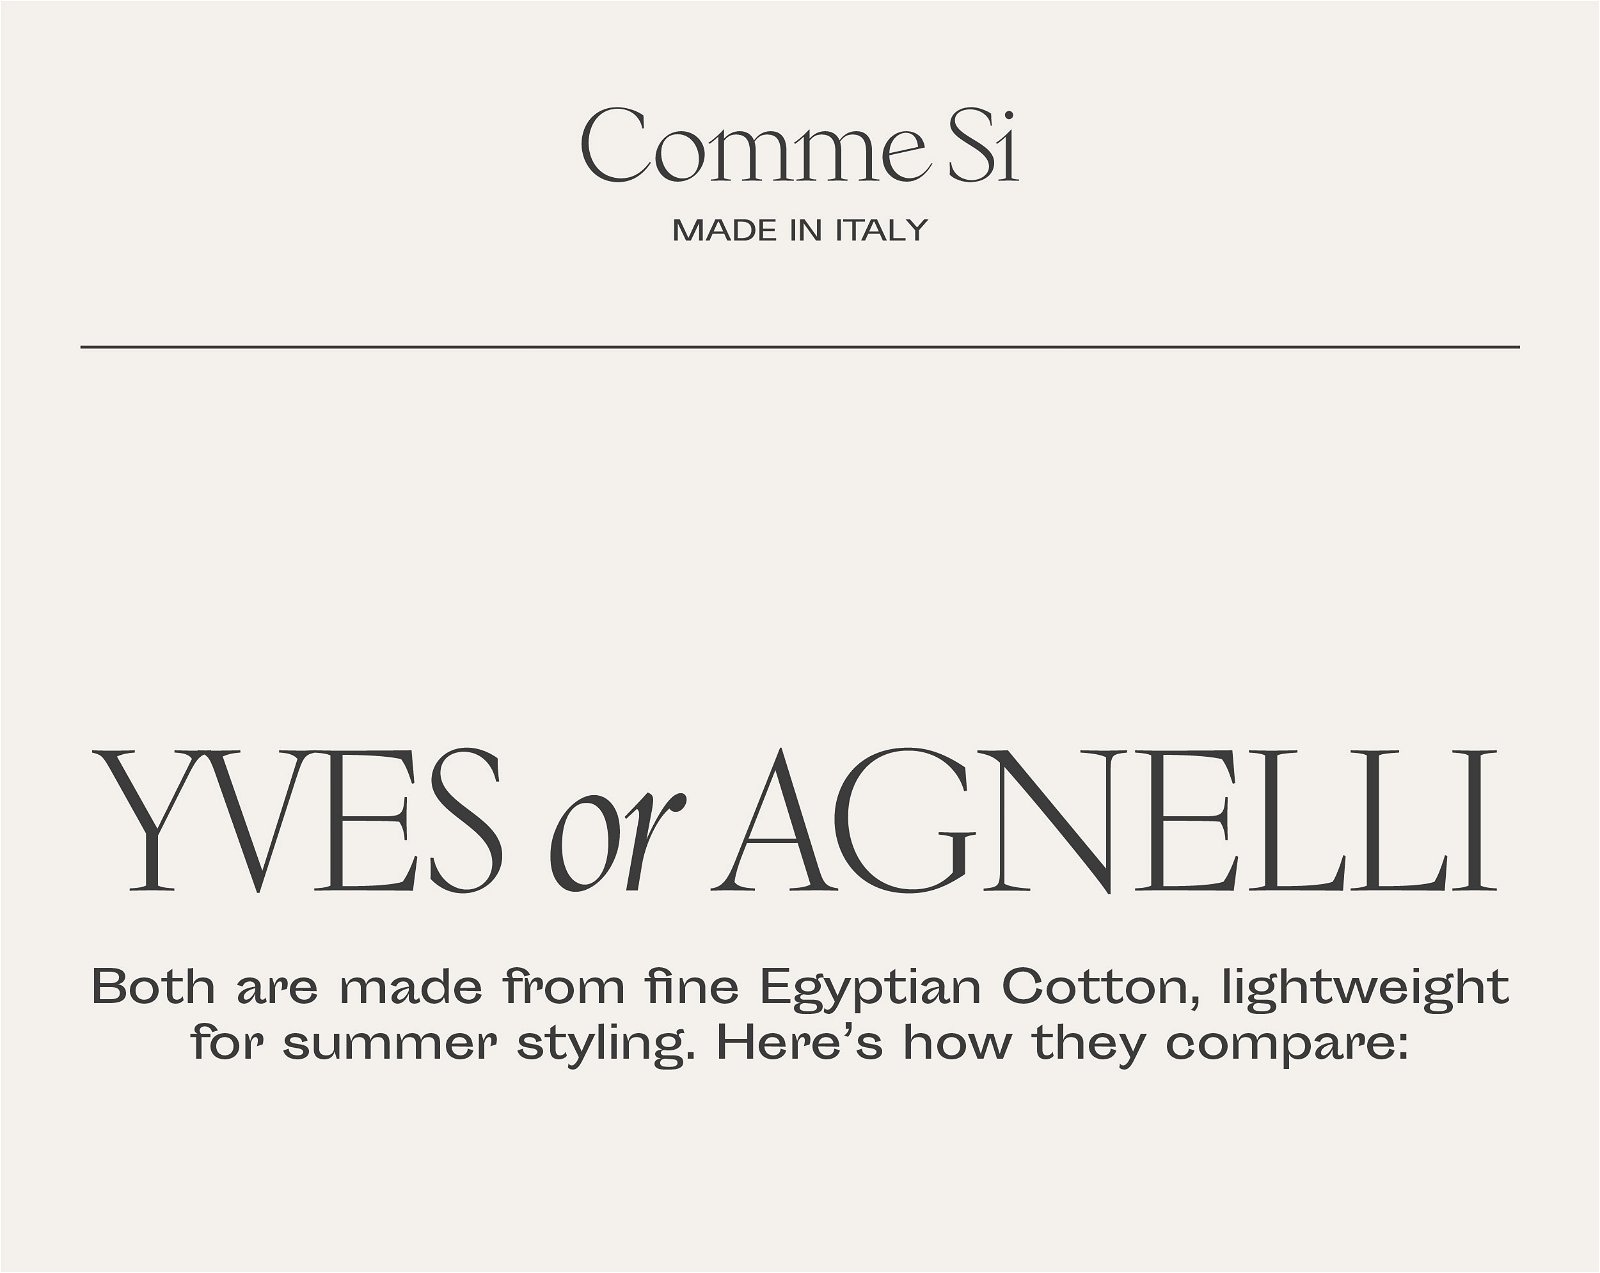 Yves or Agnelli. Both are made from fine Egyptian Cotton, lightweight for summer styling. Here's how they compare: